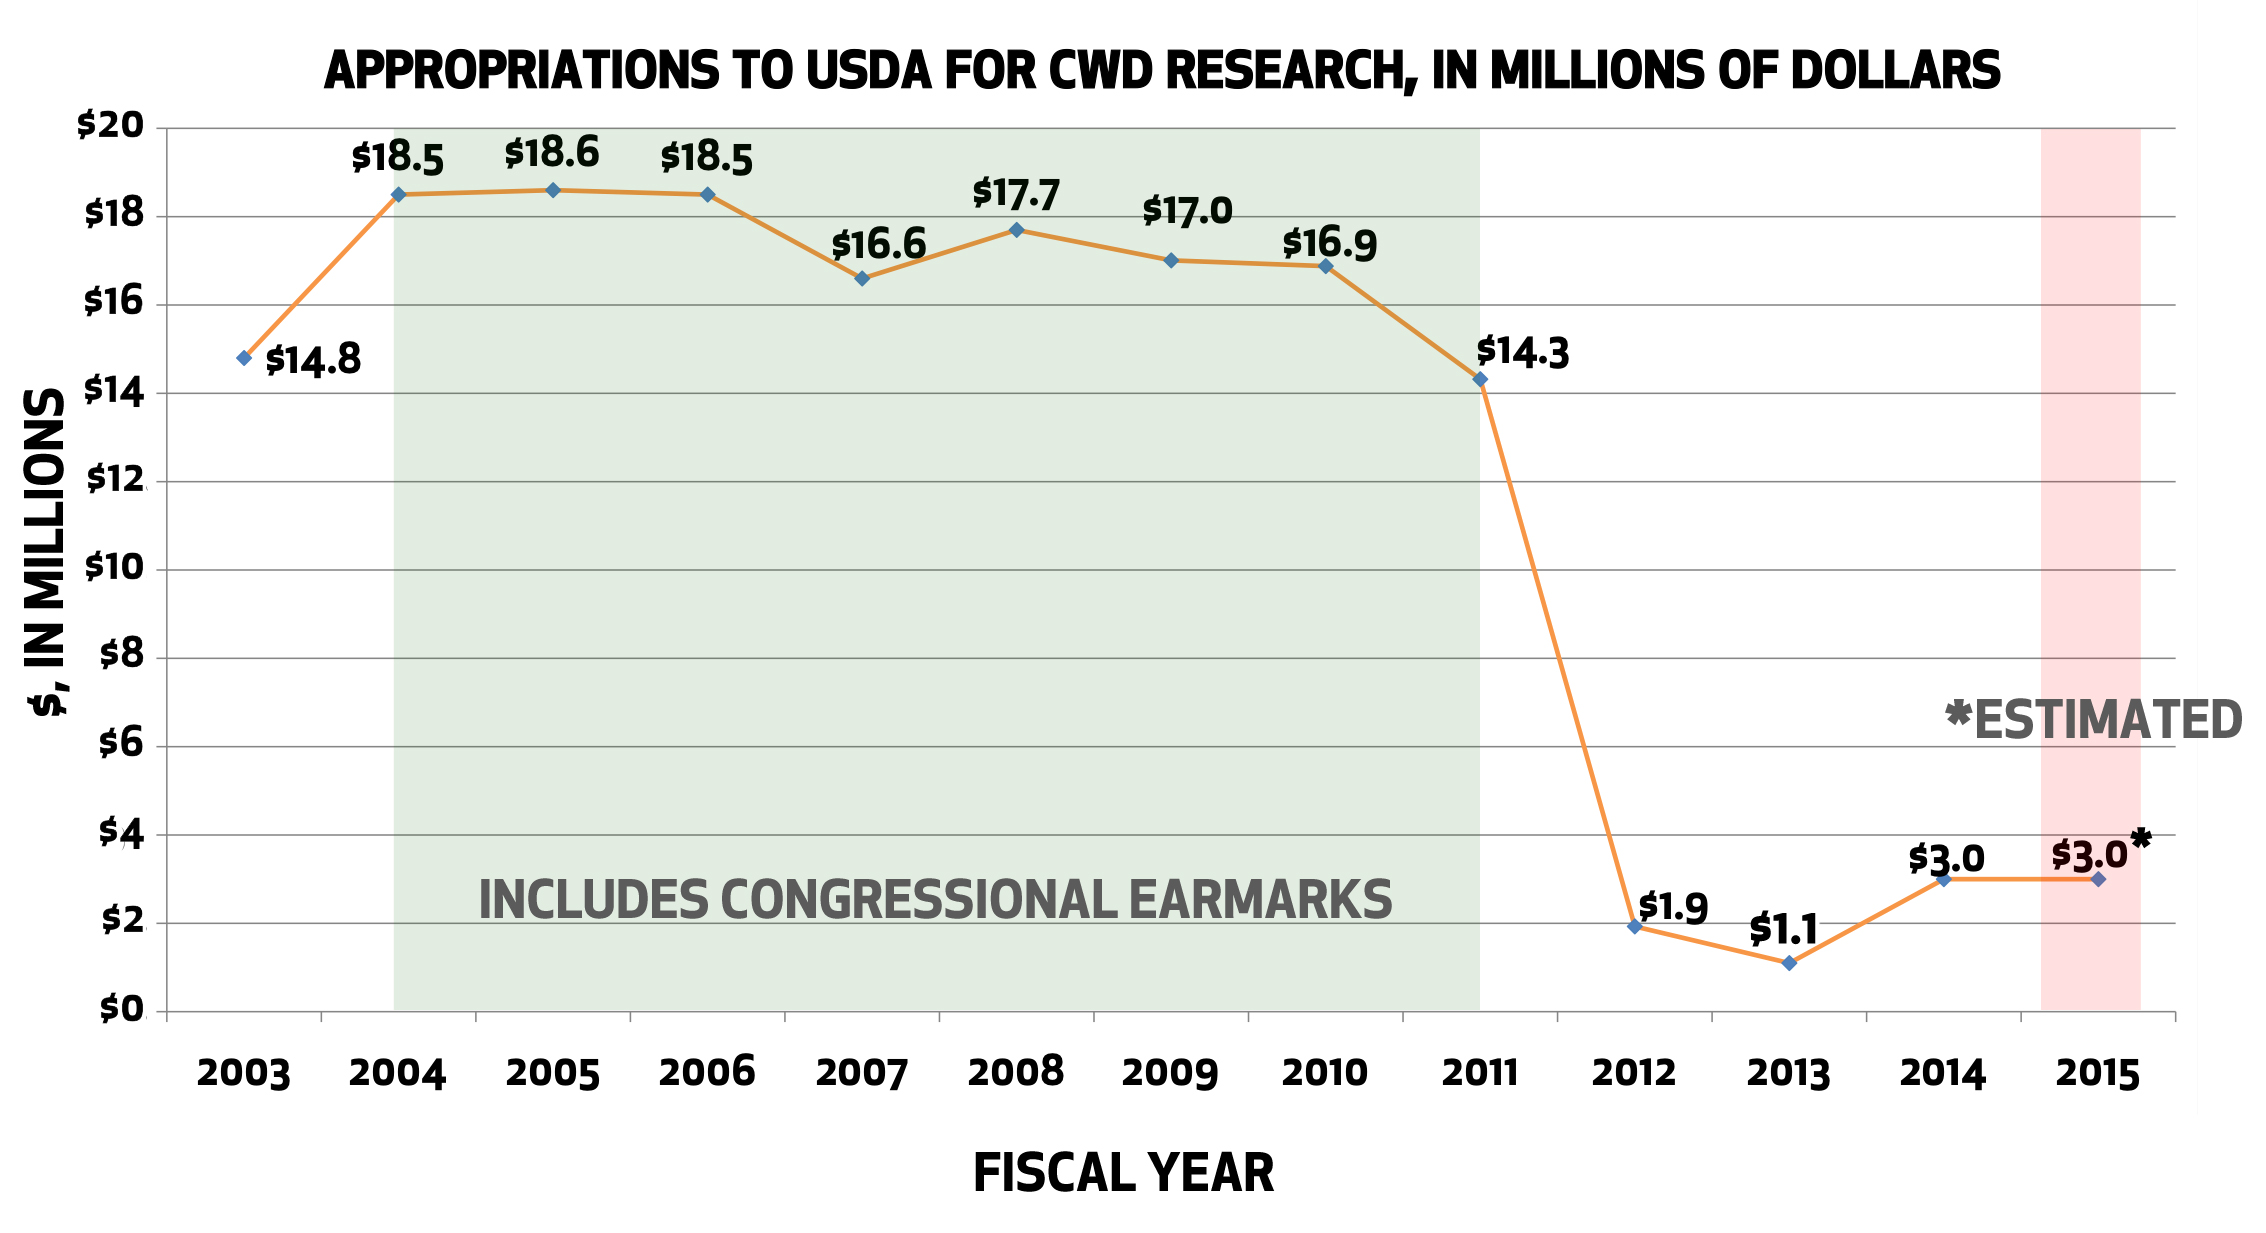 Why Has the Federal Government Cut Funding for Chronic Wasting Disease Research?